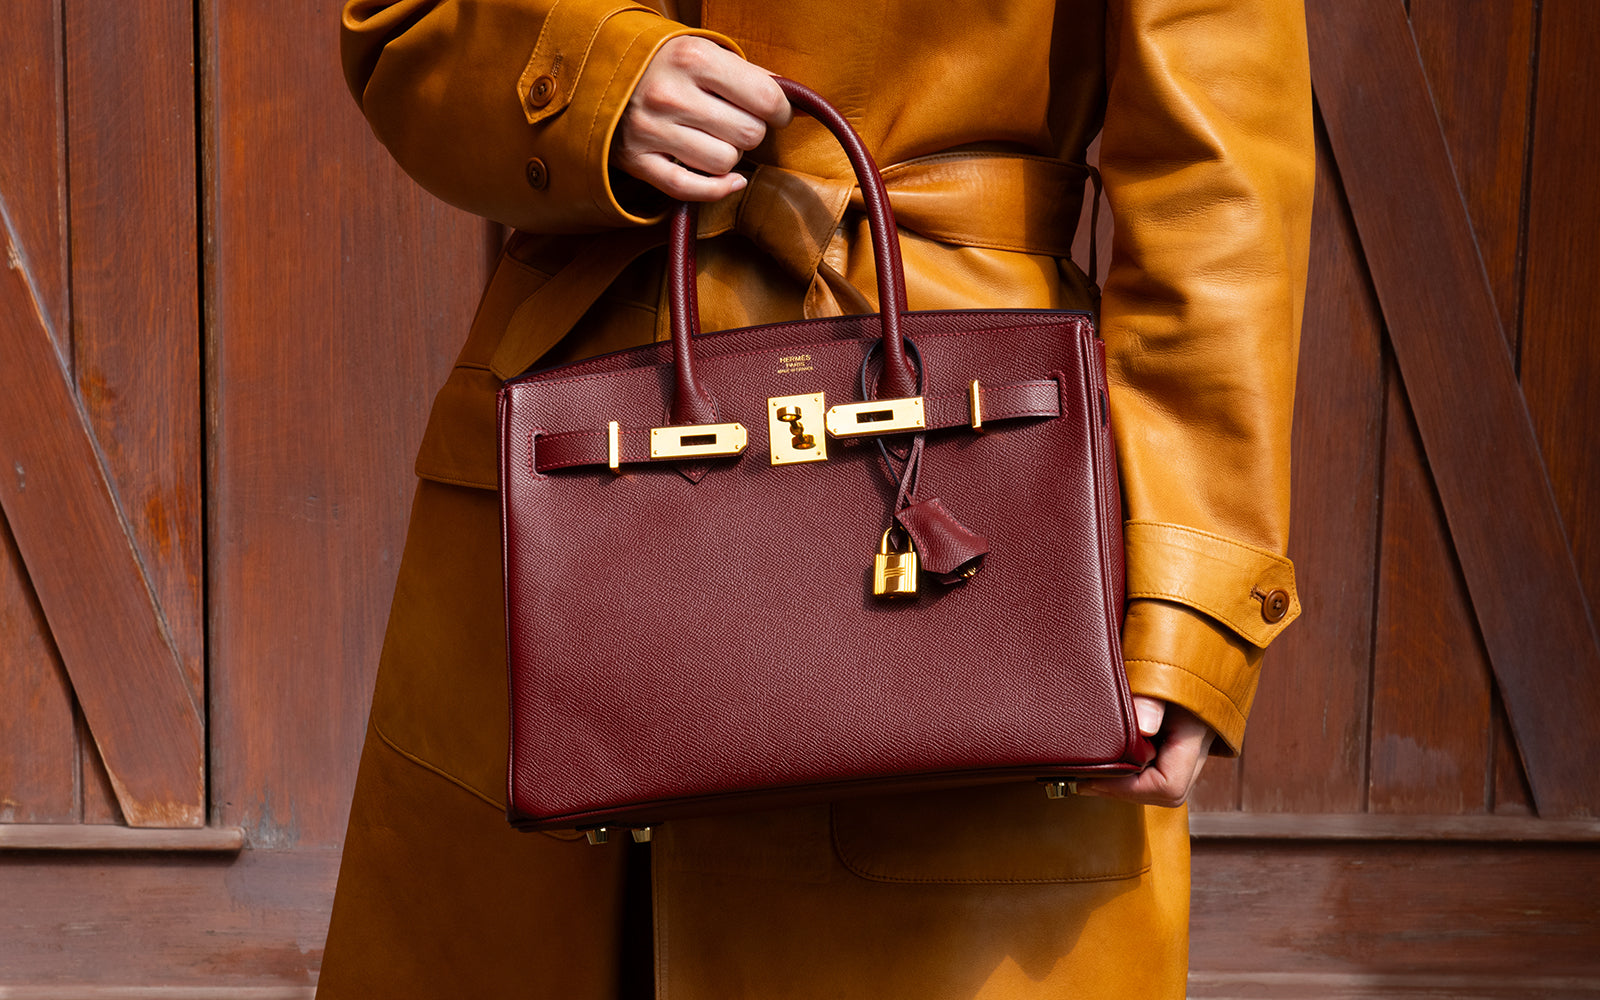 Get the authentic Hermes Birkin bag without the waitlist